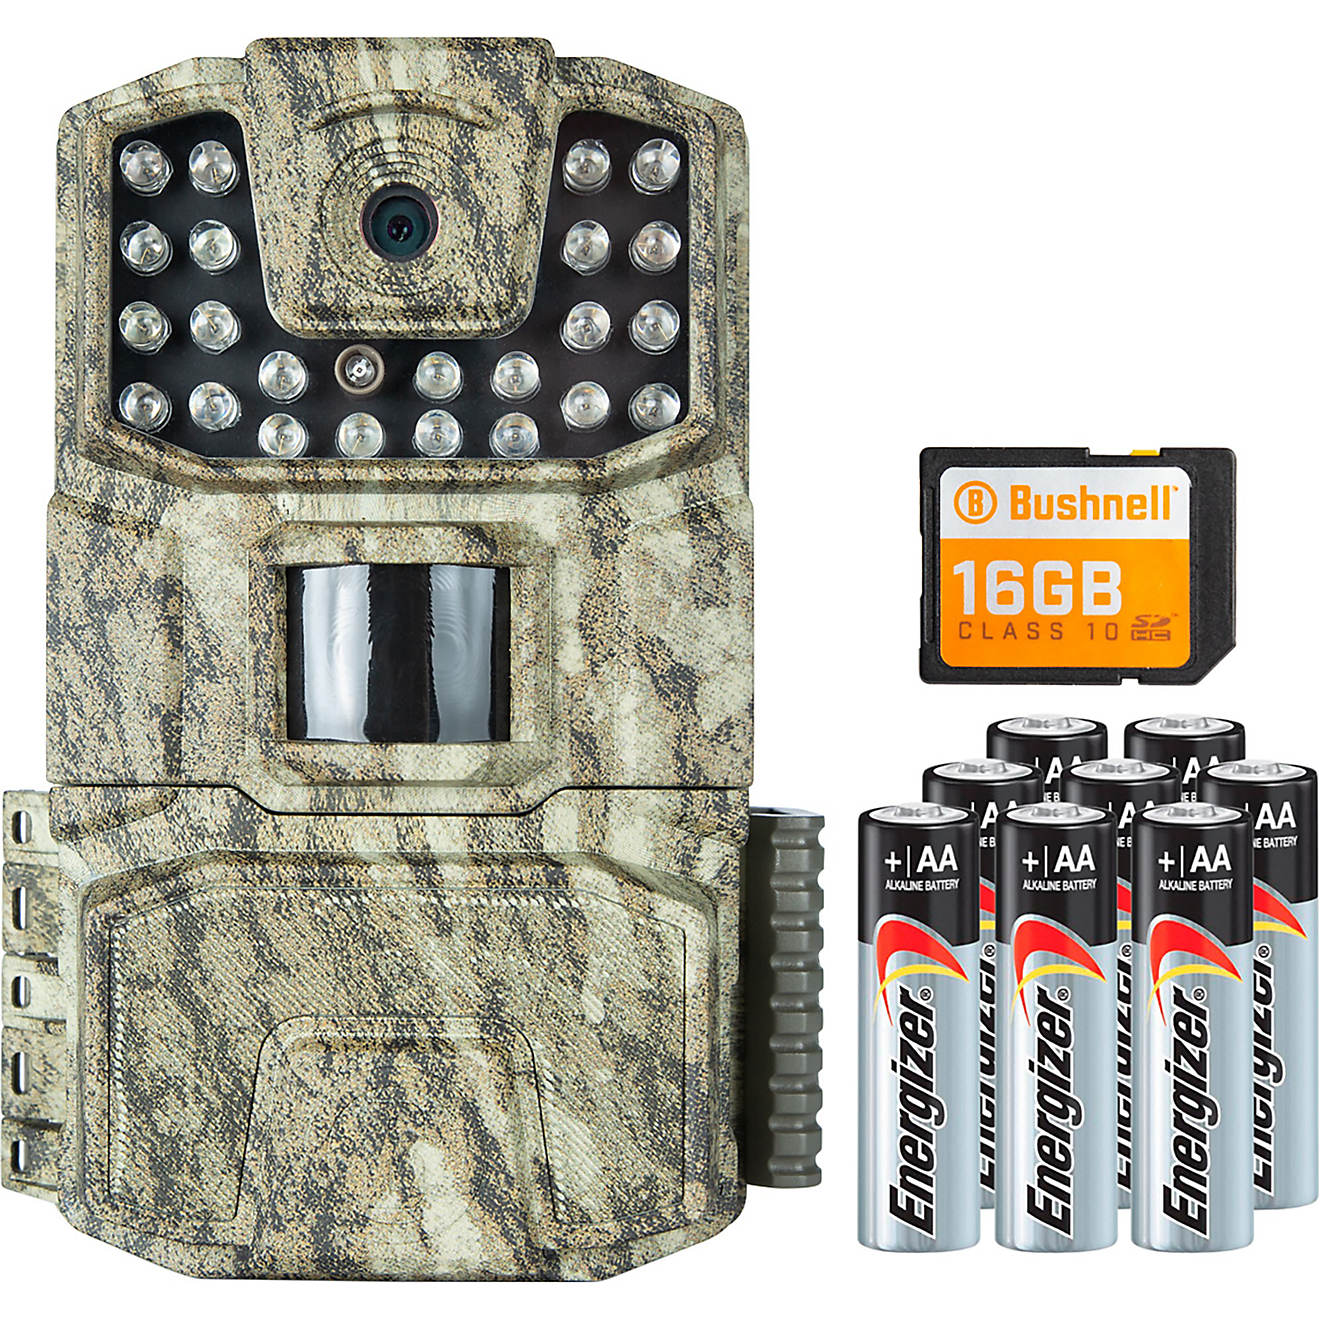 bushnell-spoton-18mp-infrated-trail-camera-academy